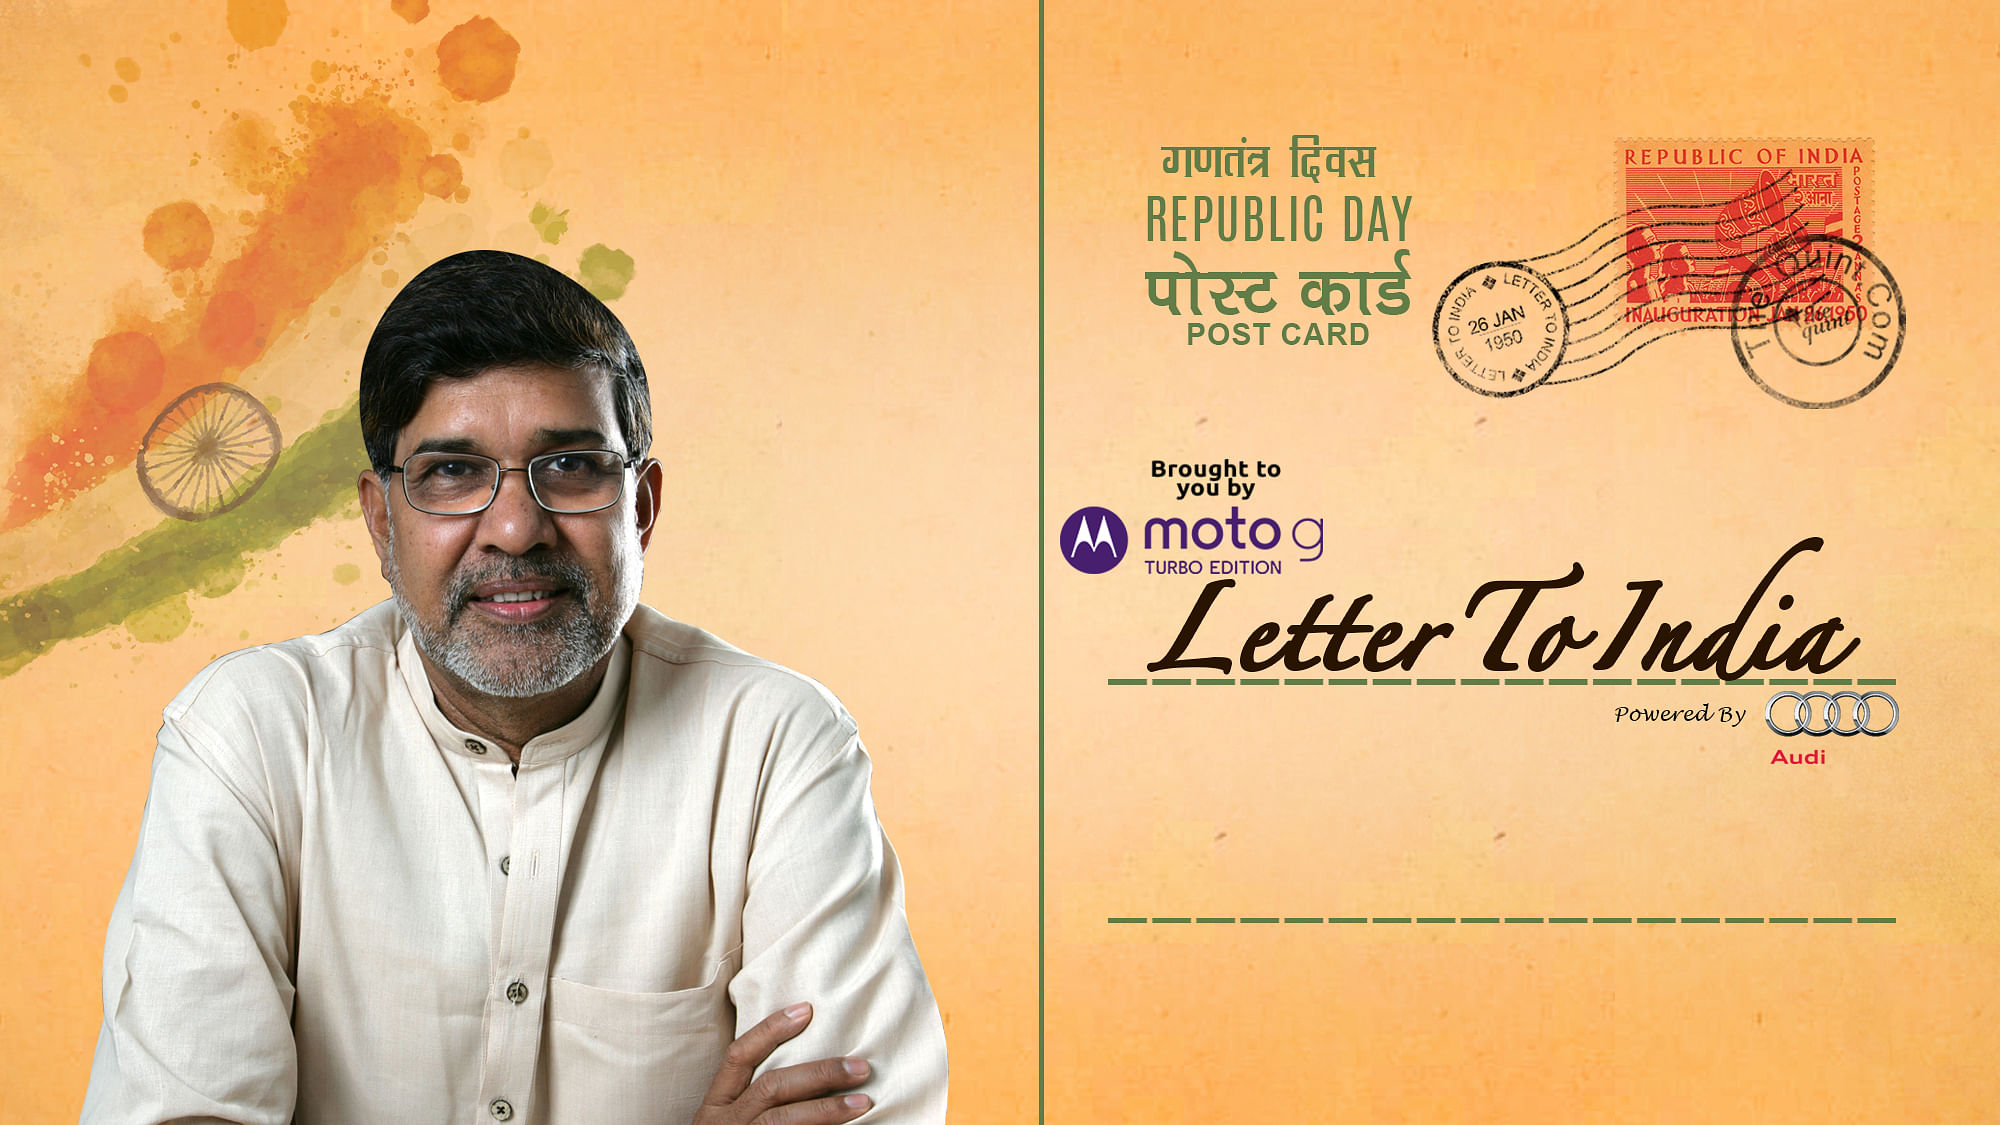 Nobel Peace Laureate Kailash Satyarthi has a message for you.